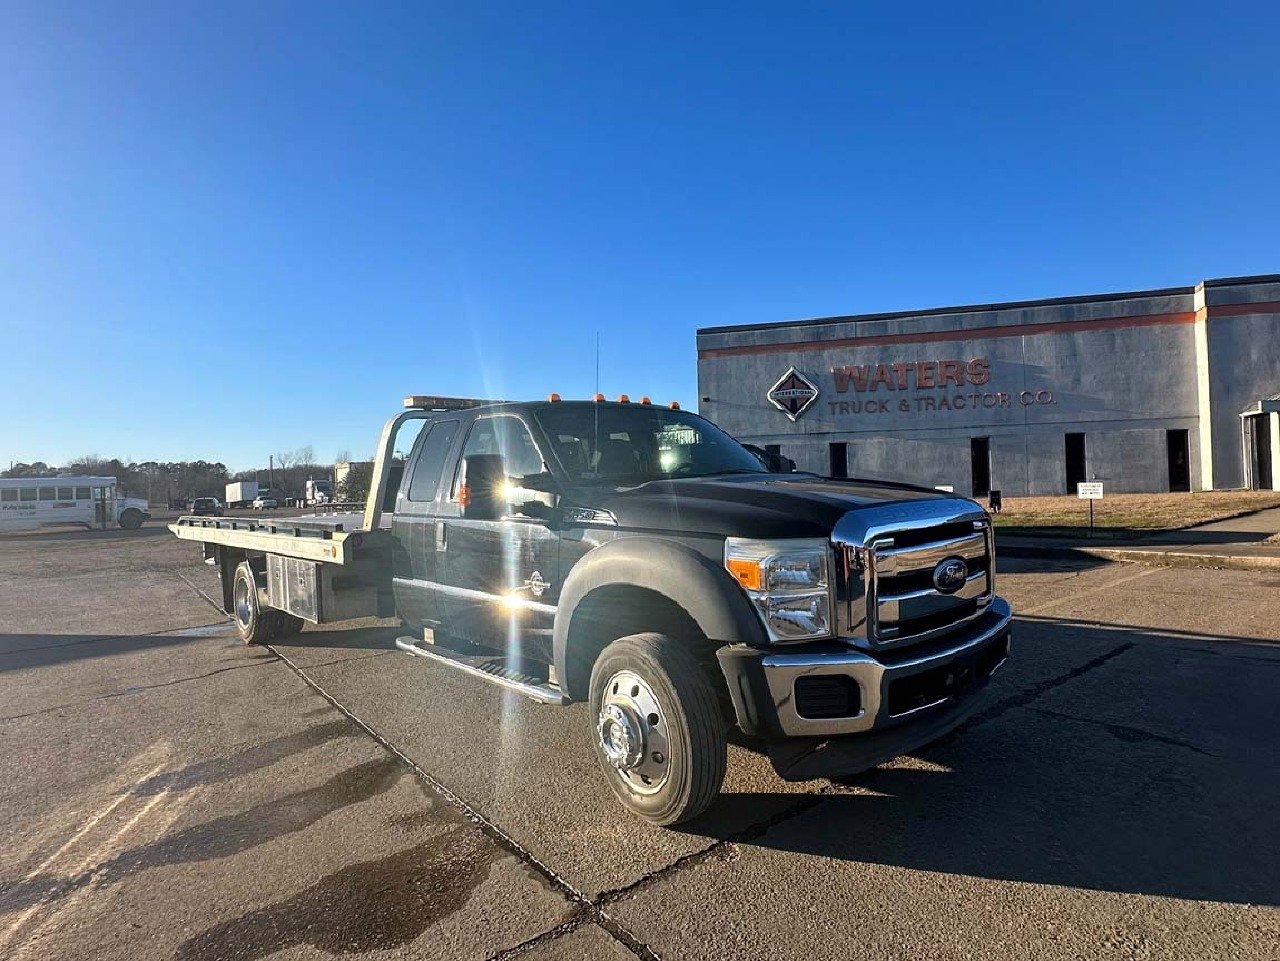 USED 2011 FORD F-550 ROLLBACK TOW TRUCK #3097